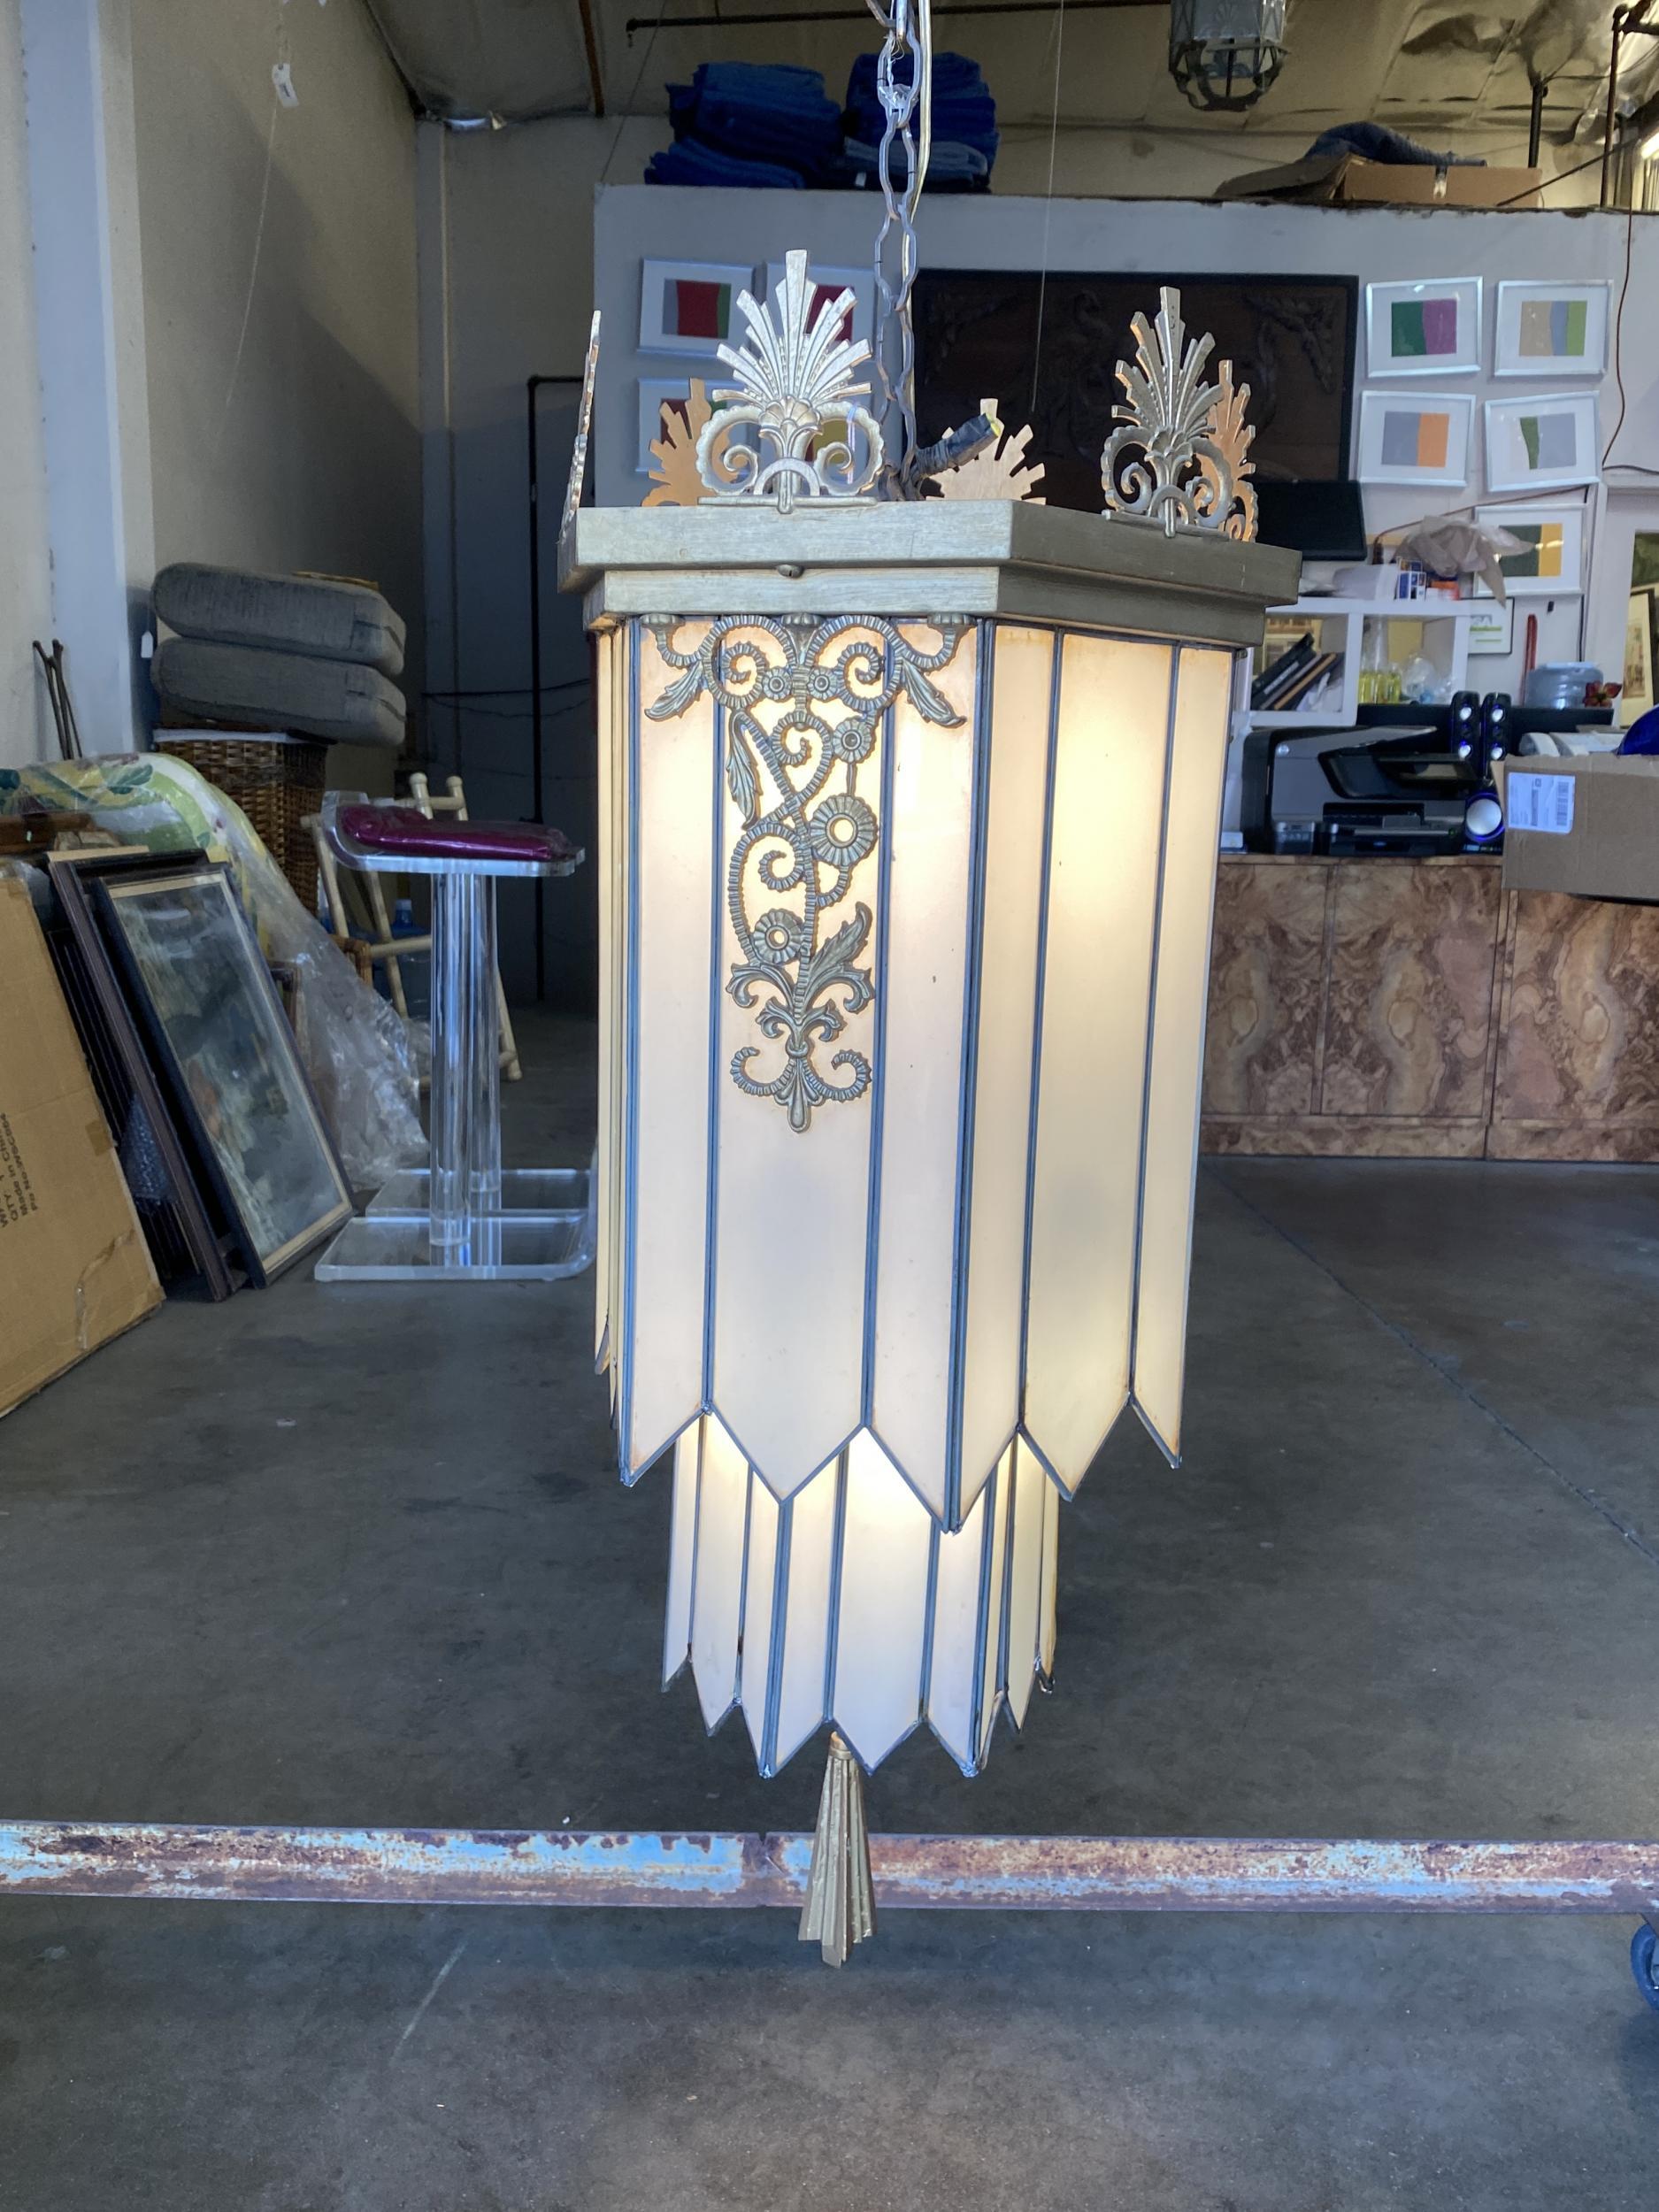 This geometrical Art Deco chandelier features milk glass leaded panels. The top is finished with sculptural scrolling motifs in bronze.